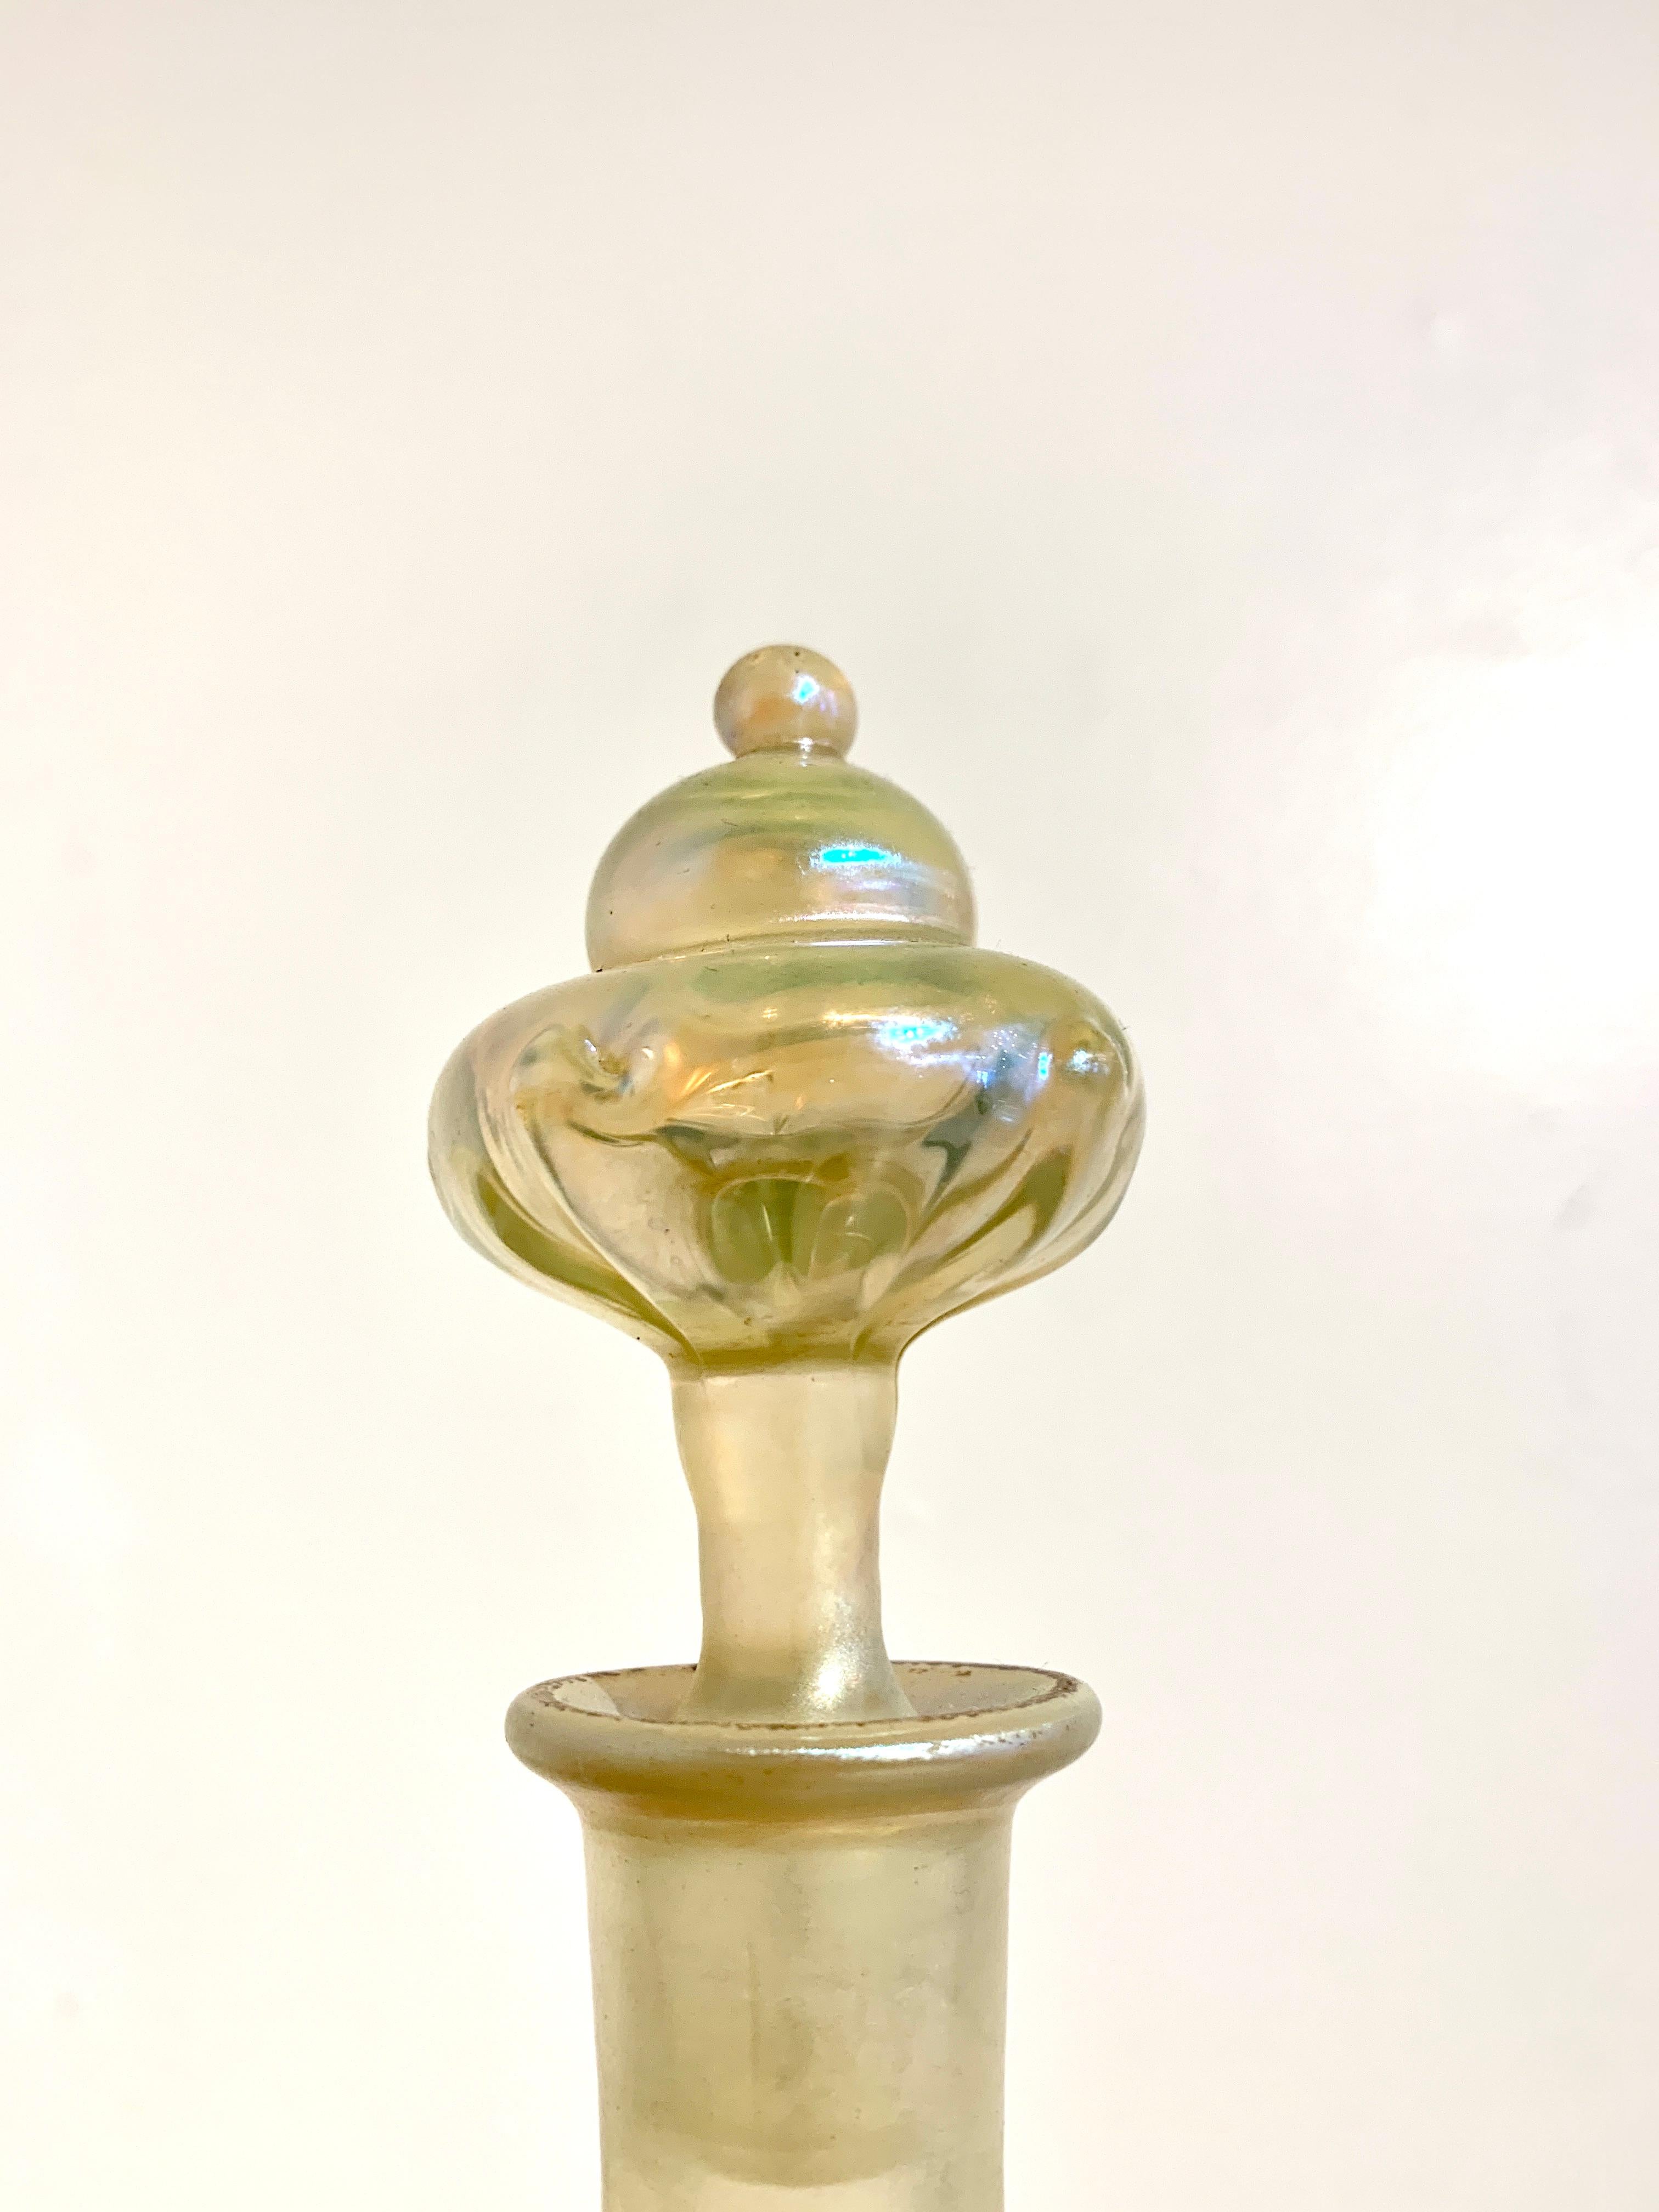 Hand-Crafted Tiffany Studios Favrille Glass Pigtail Prunt Decanter, Early 20th Century, USA For Sale